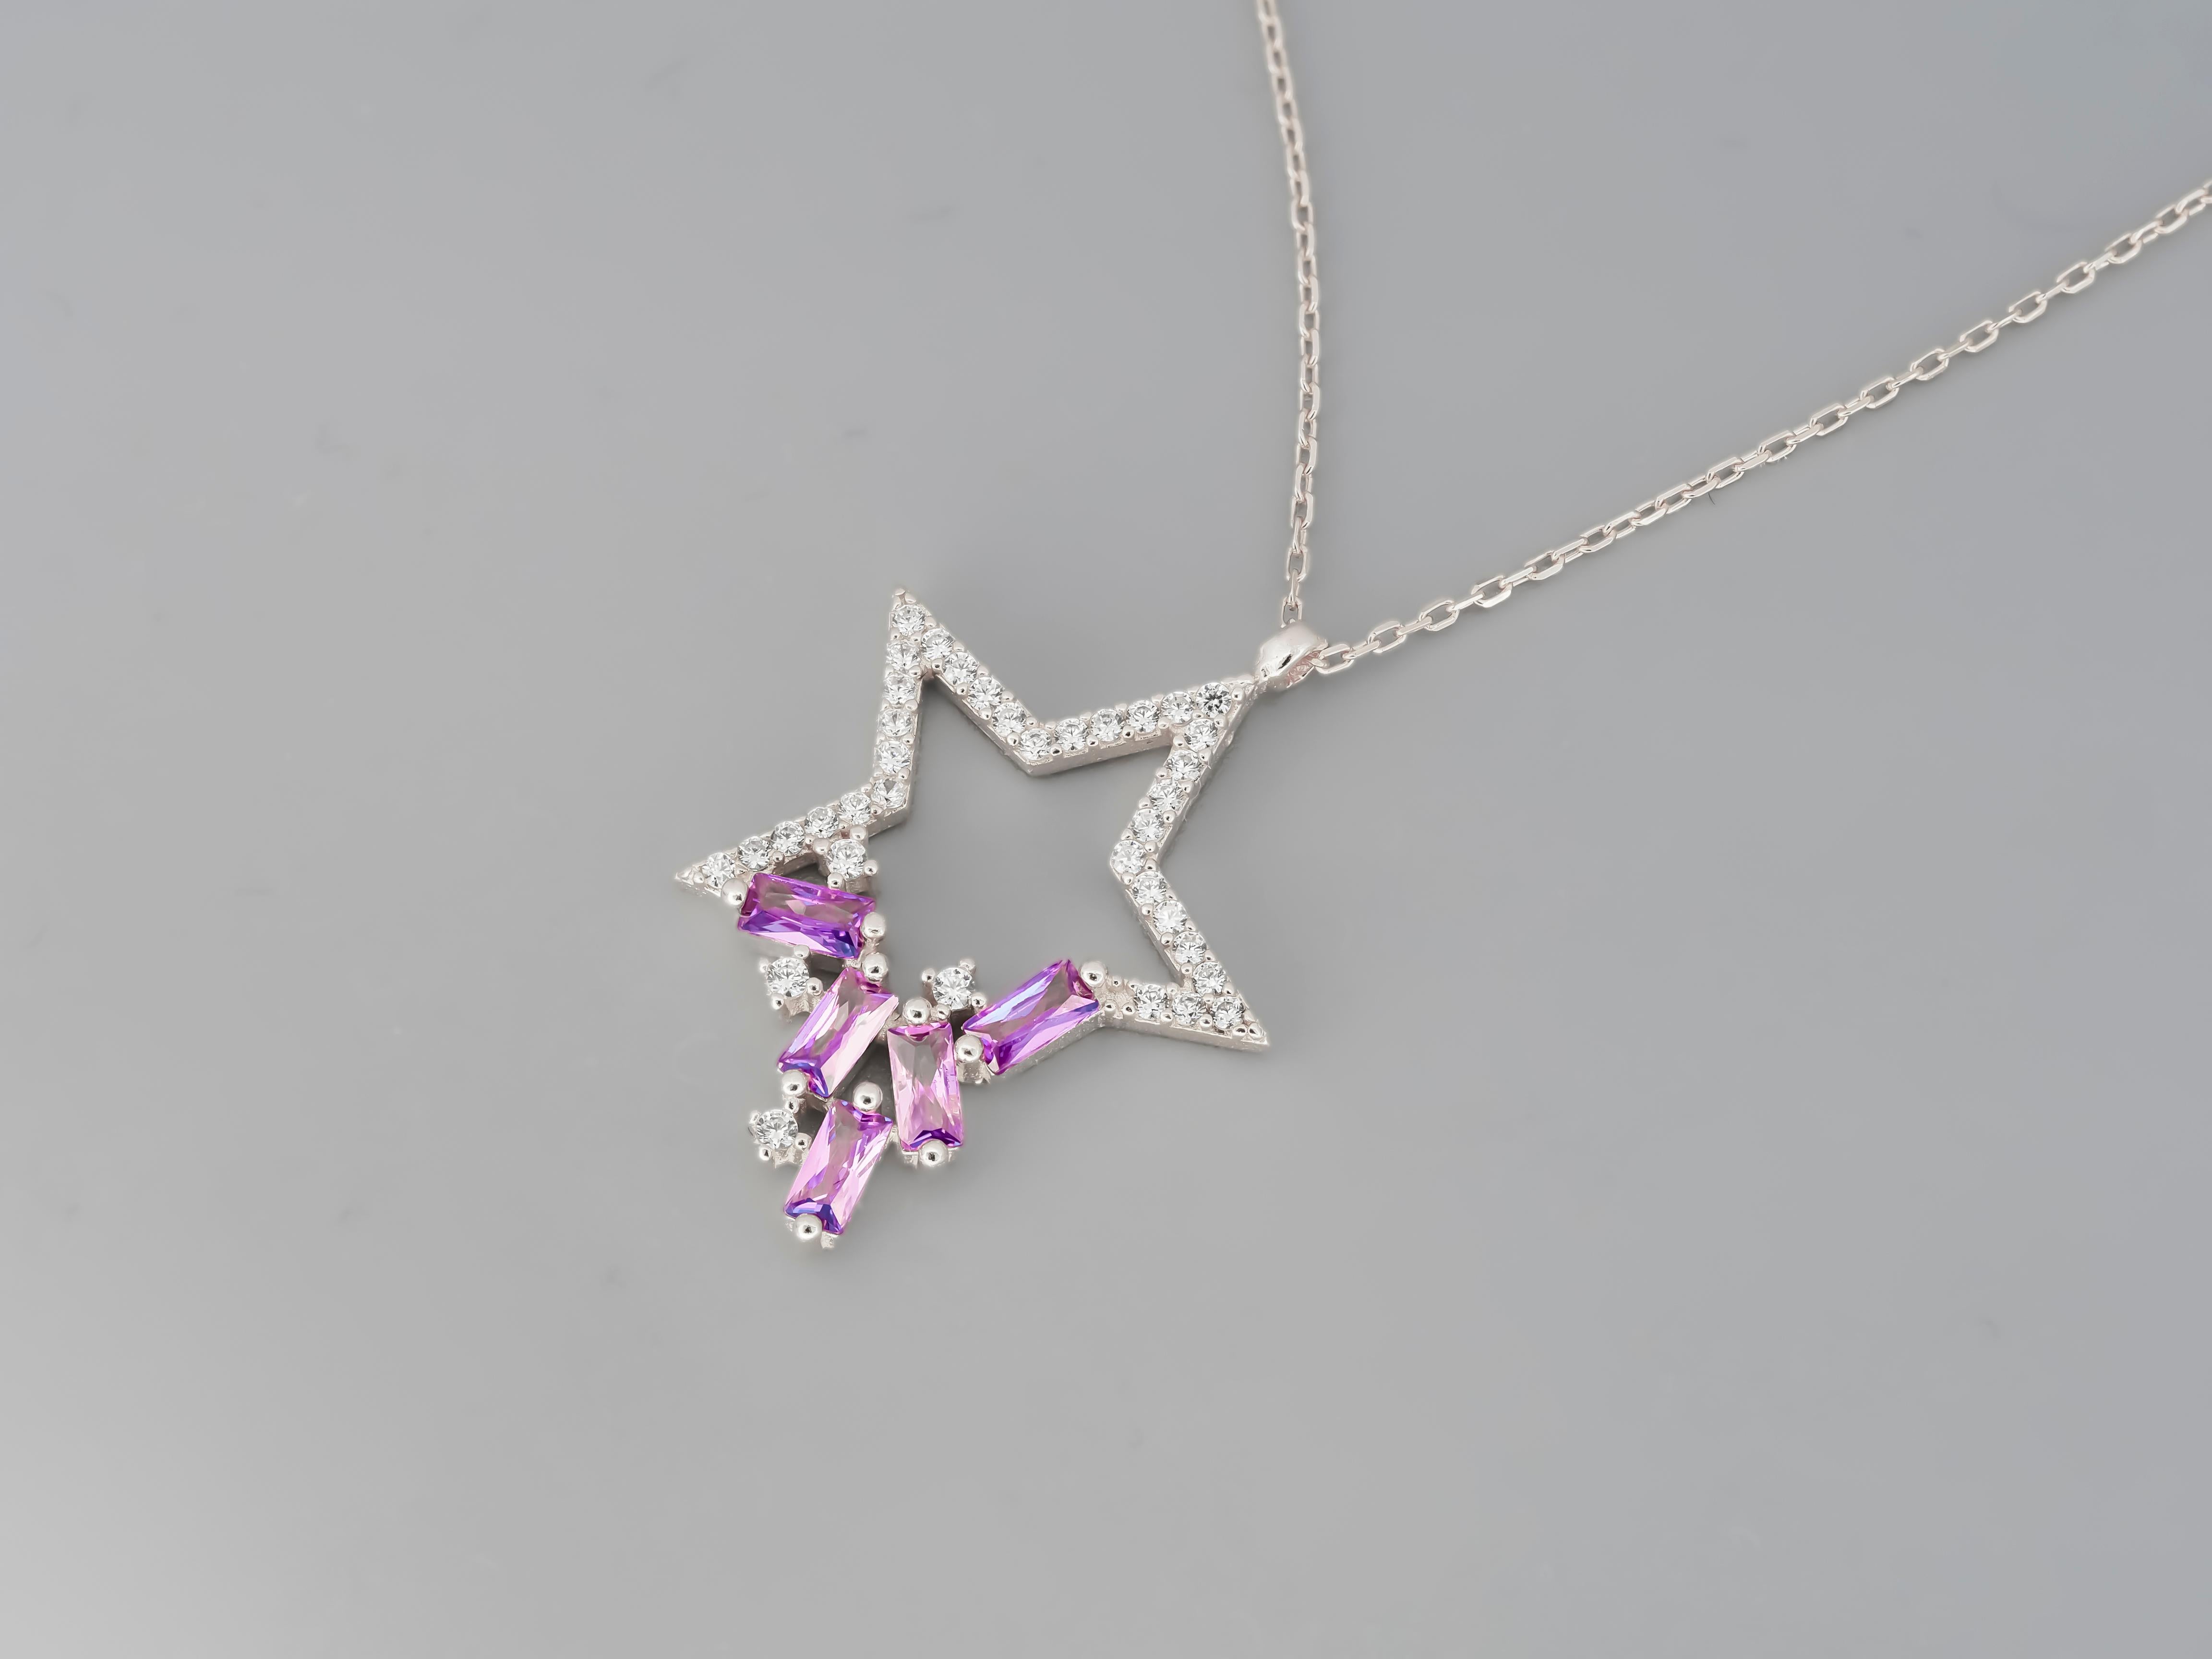 Star pendant necklace with diamonds and amethysts in 14k gold. 
Chain necklace with star pendant. 14k gold Star Pendant Necklace.

Metal: 14k gold. 
Necklace lenght - 45 sm.
Star pendant gemstones: diamonds, round brilliant cut, G/VS, weight aprox